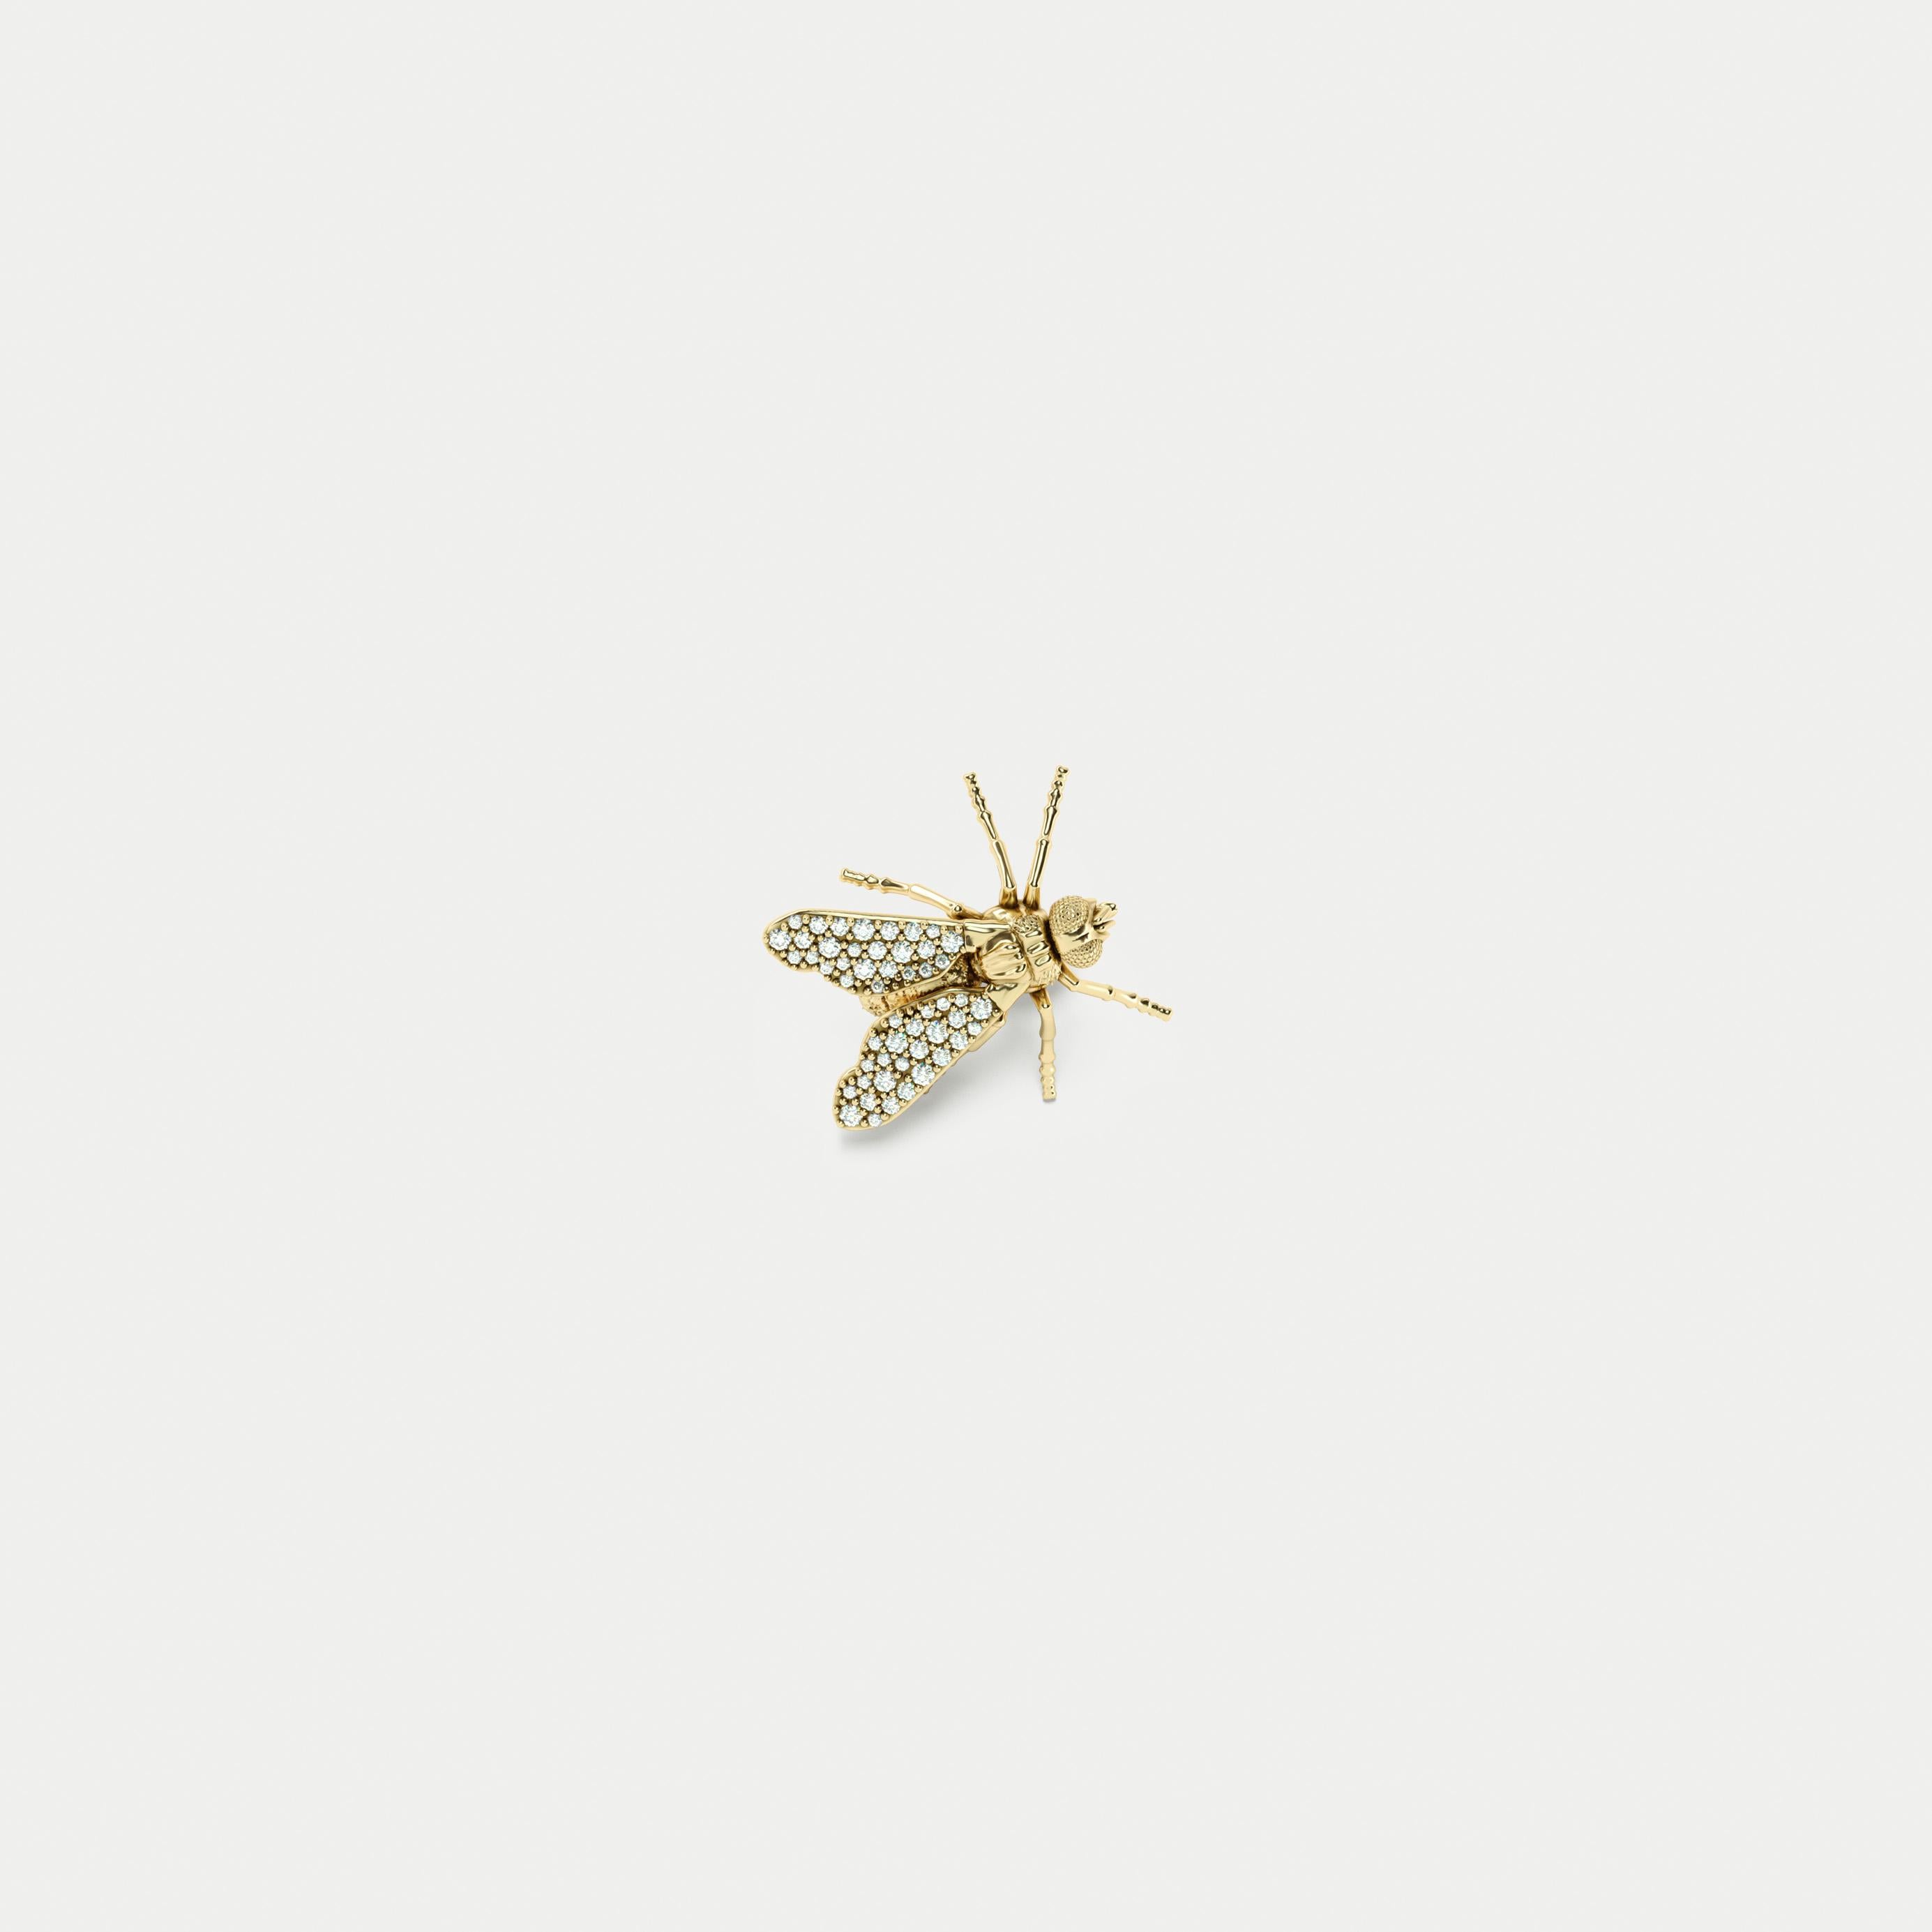 Golden Stud Fly Earring, 18K Yellow Gold with White Diamonds
42u. (1mm Ø) H/SI

Mono earring in the shape of two hyperrealistic flies is made of 18K yellow gold with white diamonds, full pavé.
The post and backing are made of steel, which provides